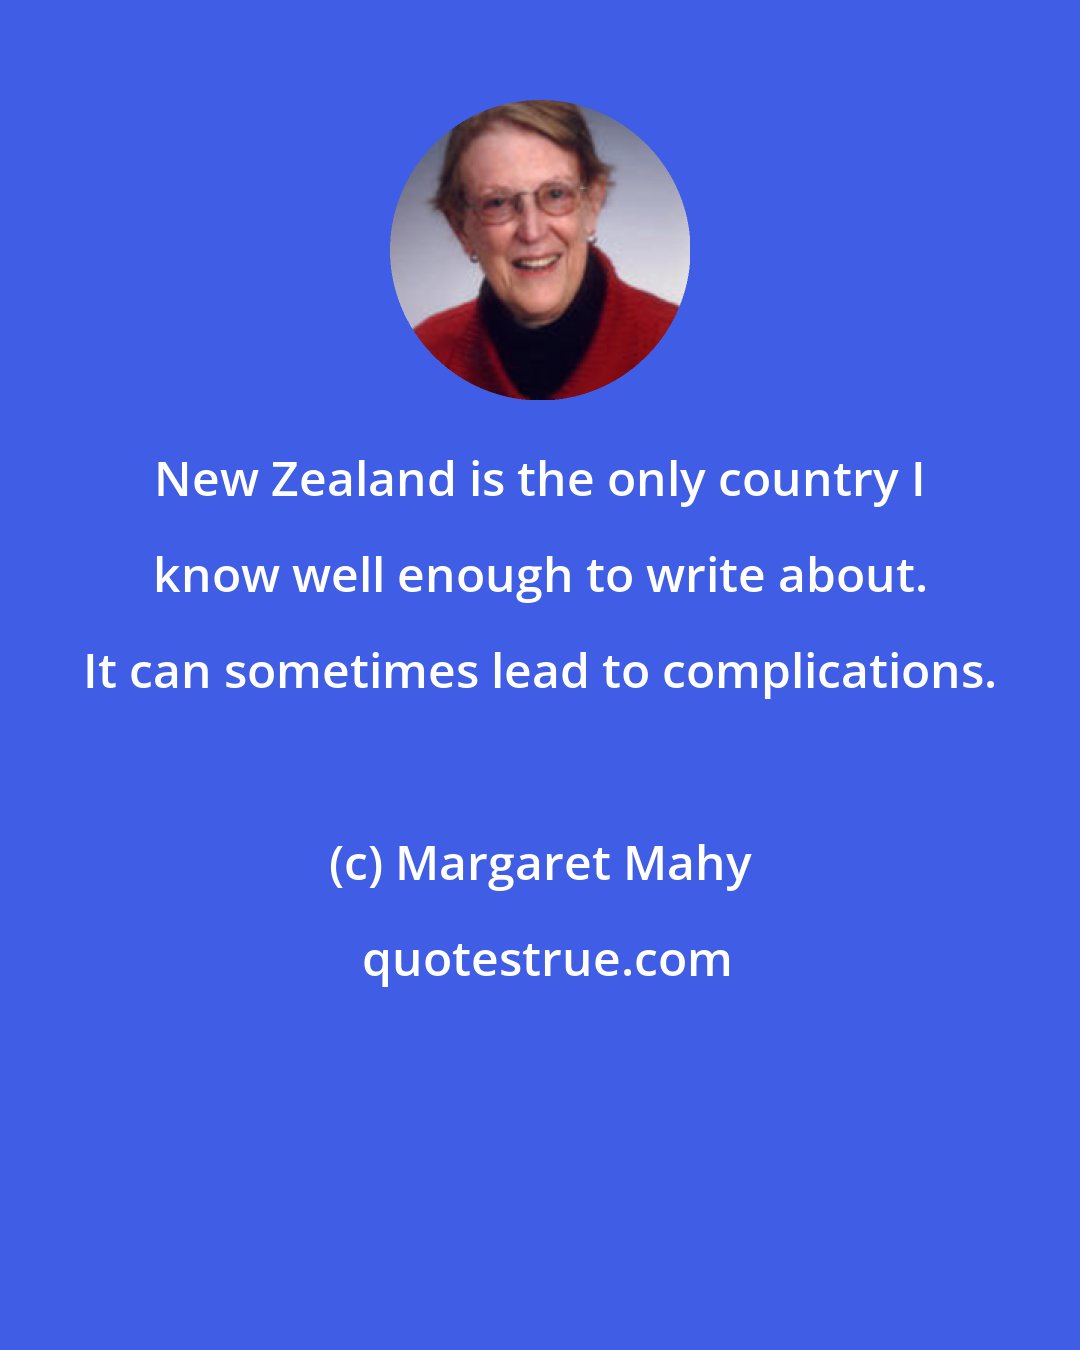 Margaret Mahy: New Zealand is the only country I know well enough to write about. It can sometimes lead to complications.